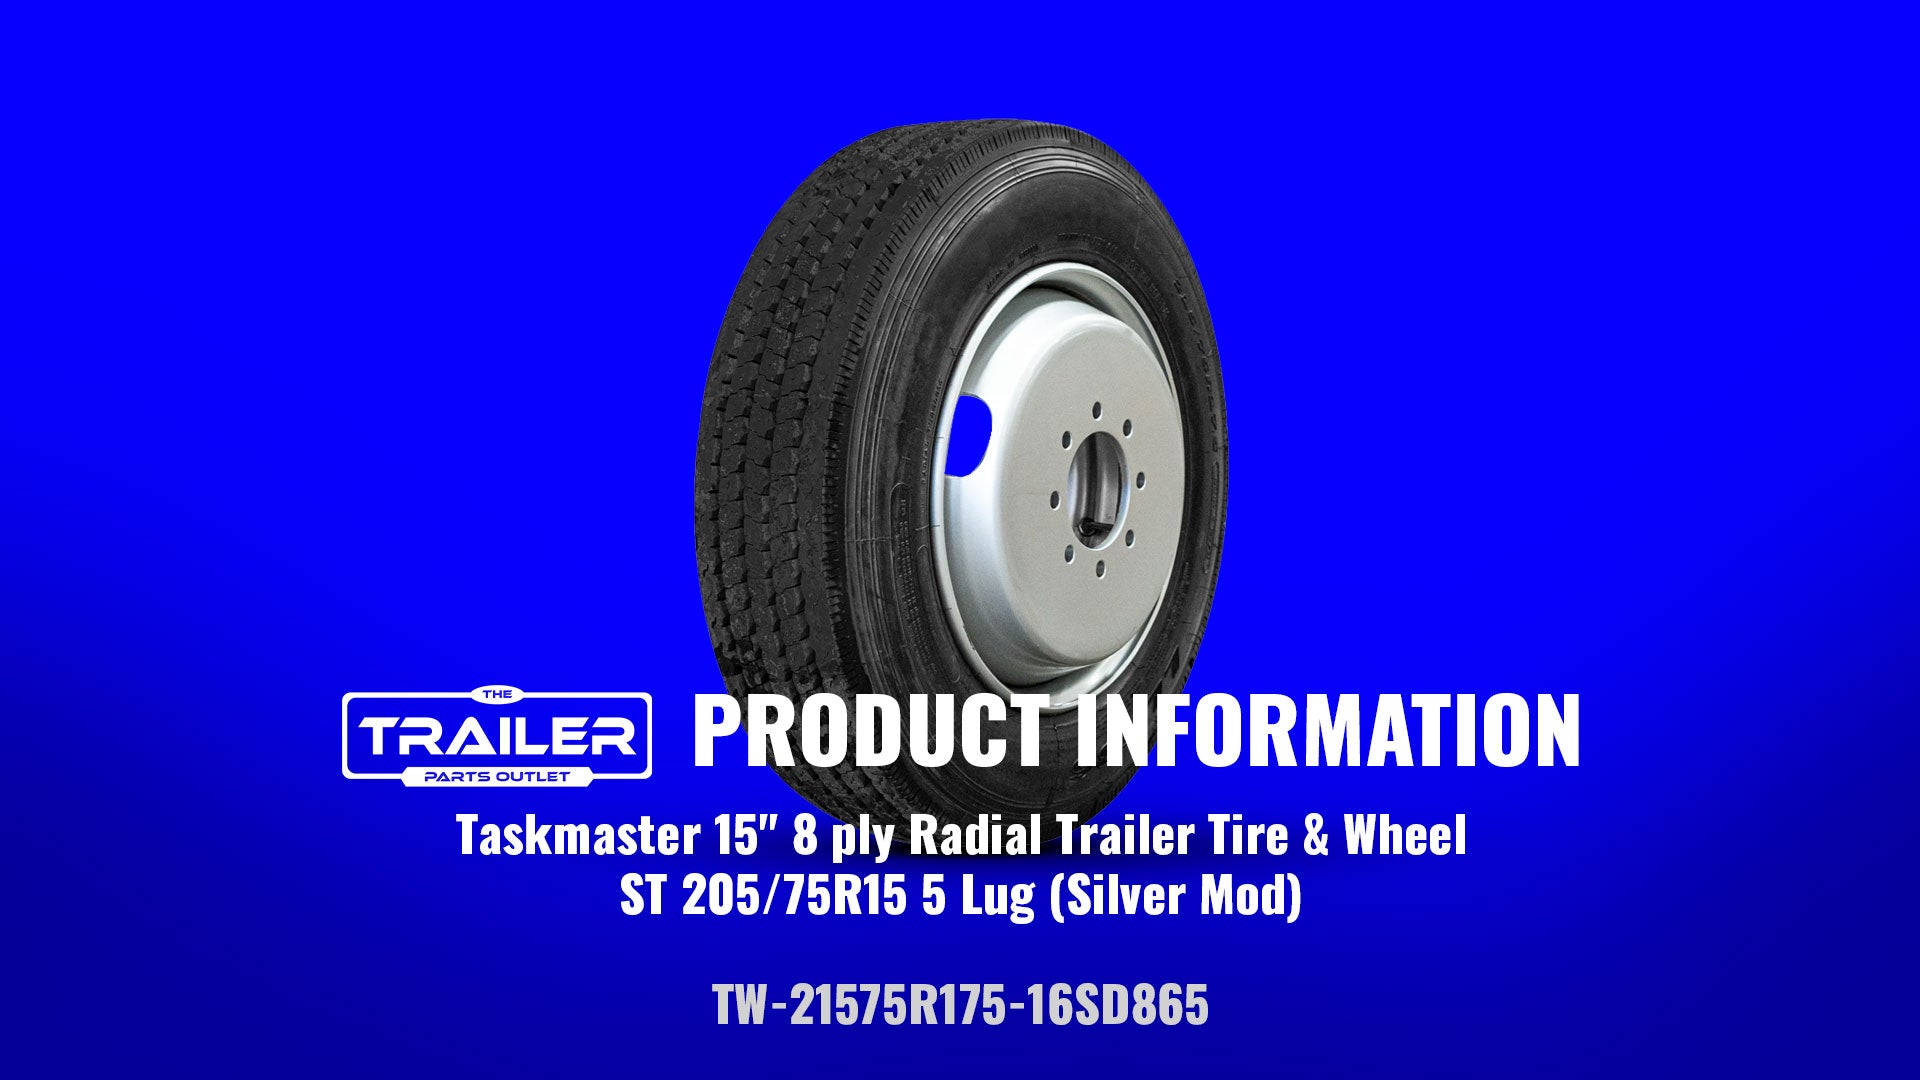 Introducing the Taskmaster 17.5" 16 Ply Radial Trailer Tire & Wheel - ST 215/75R17.5 8 Lug (Silver Dual), SKU: TW-21575R175-16SD865. Get ready to experience superior strength and performance for your trailer!